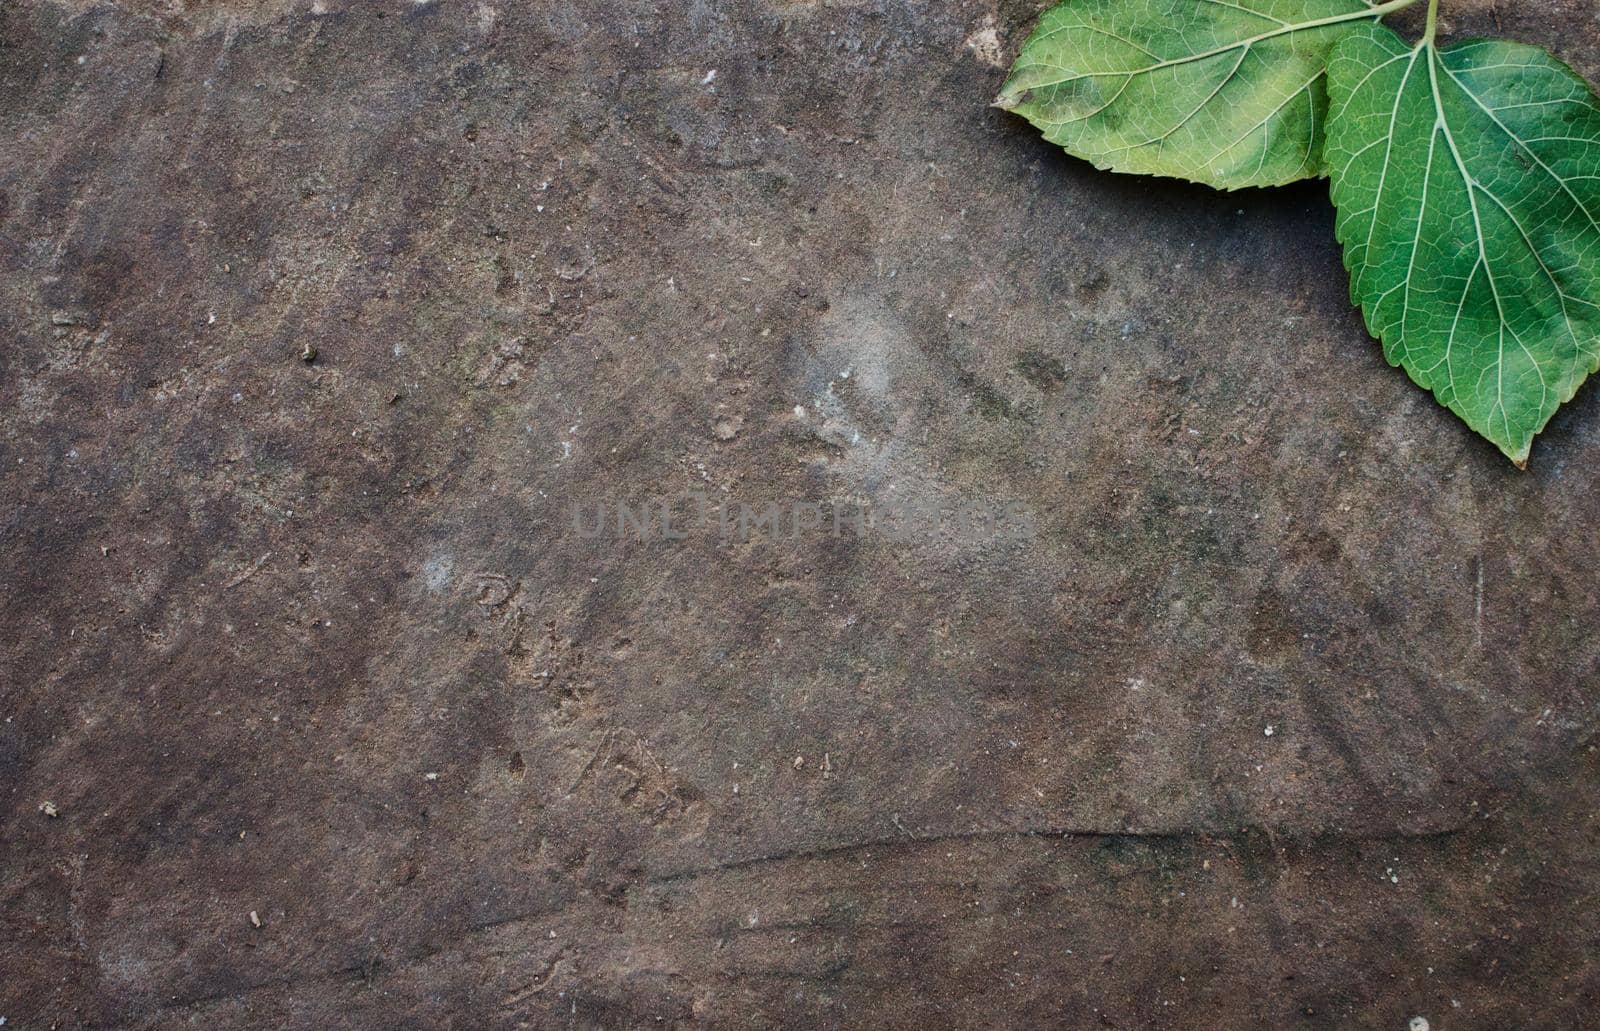 A grey brown rock or stone background with a pair of green leaves in one corner